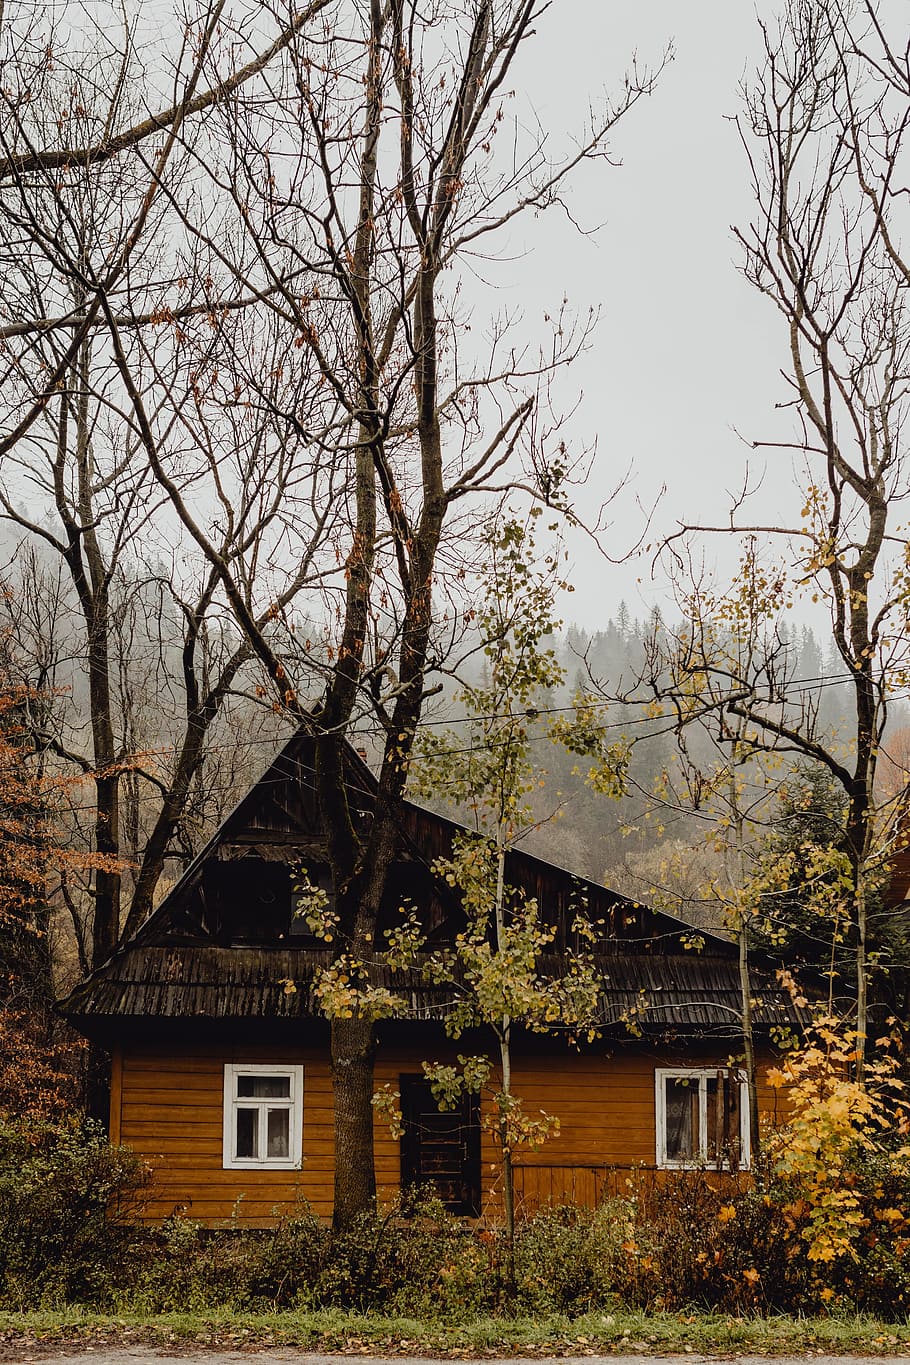 old, wooden, houses, mountains, autumn, wooden house, old house, cabin, shed, fall